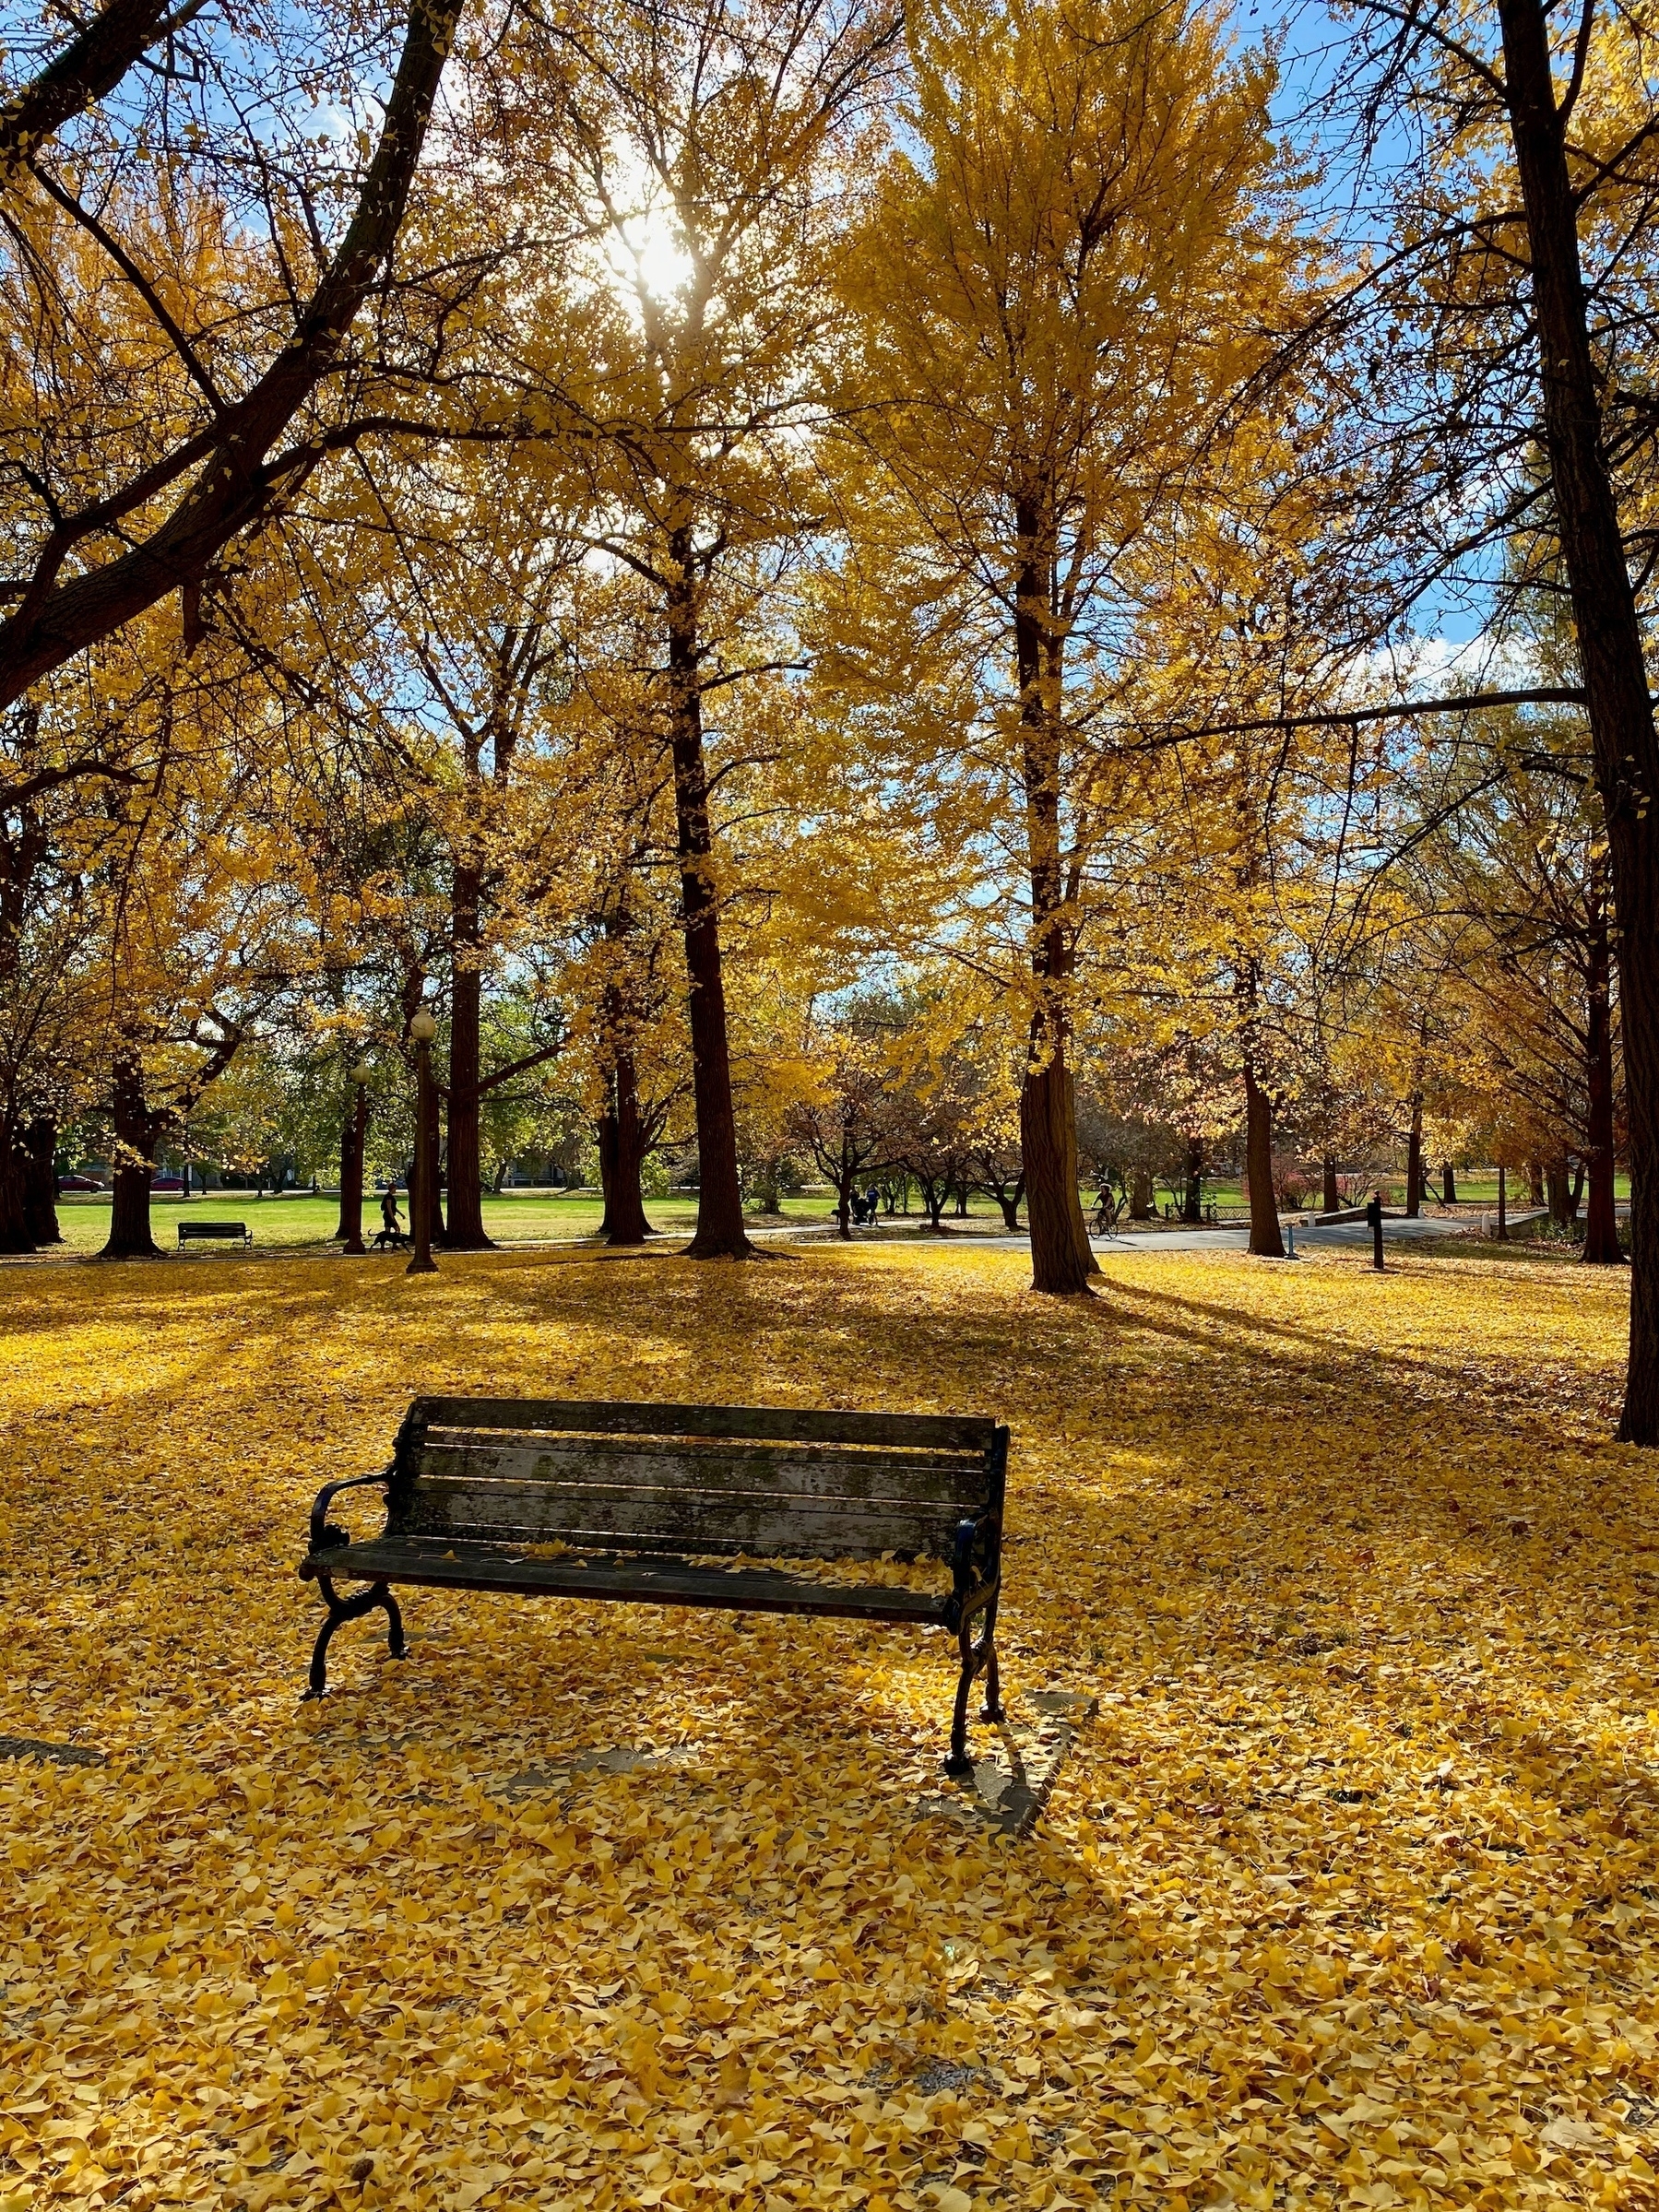 Wooden bench in a park, with yellow leaves covering the ground and some on the bench. There is a paved trail in the background, with yellowing trees throughout the photo.